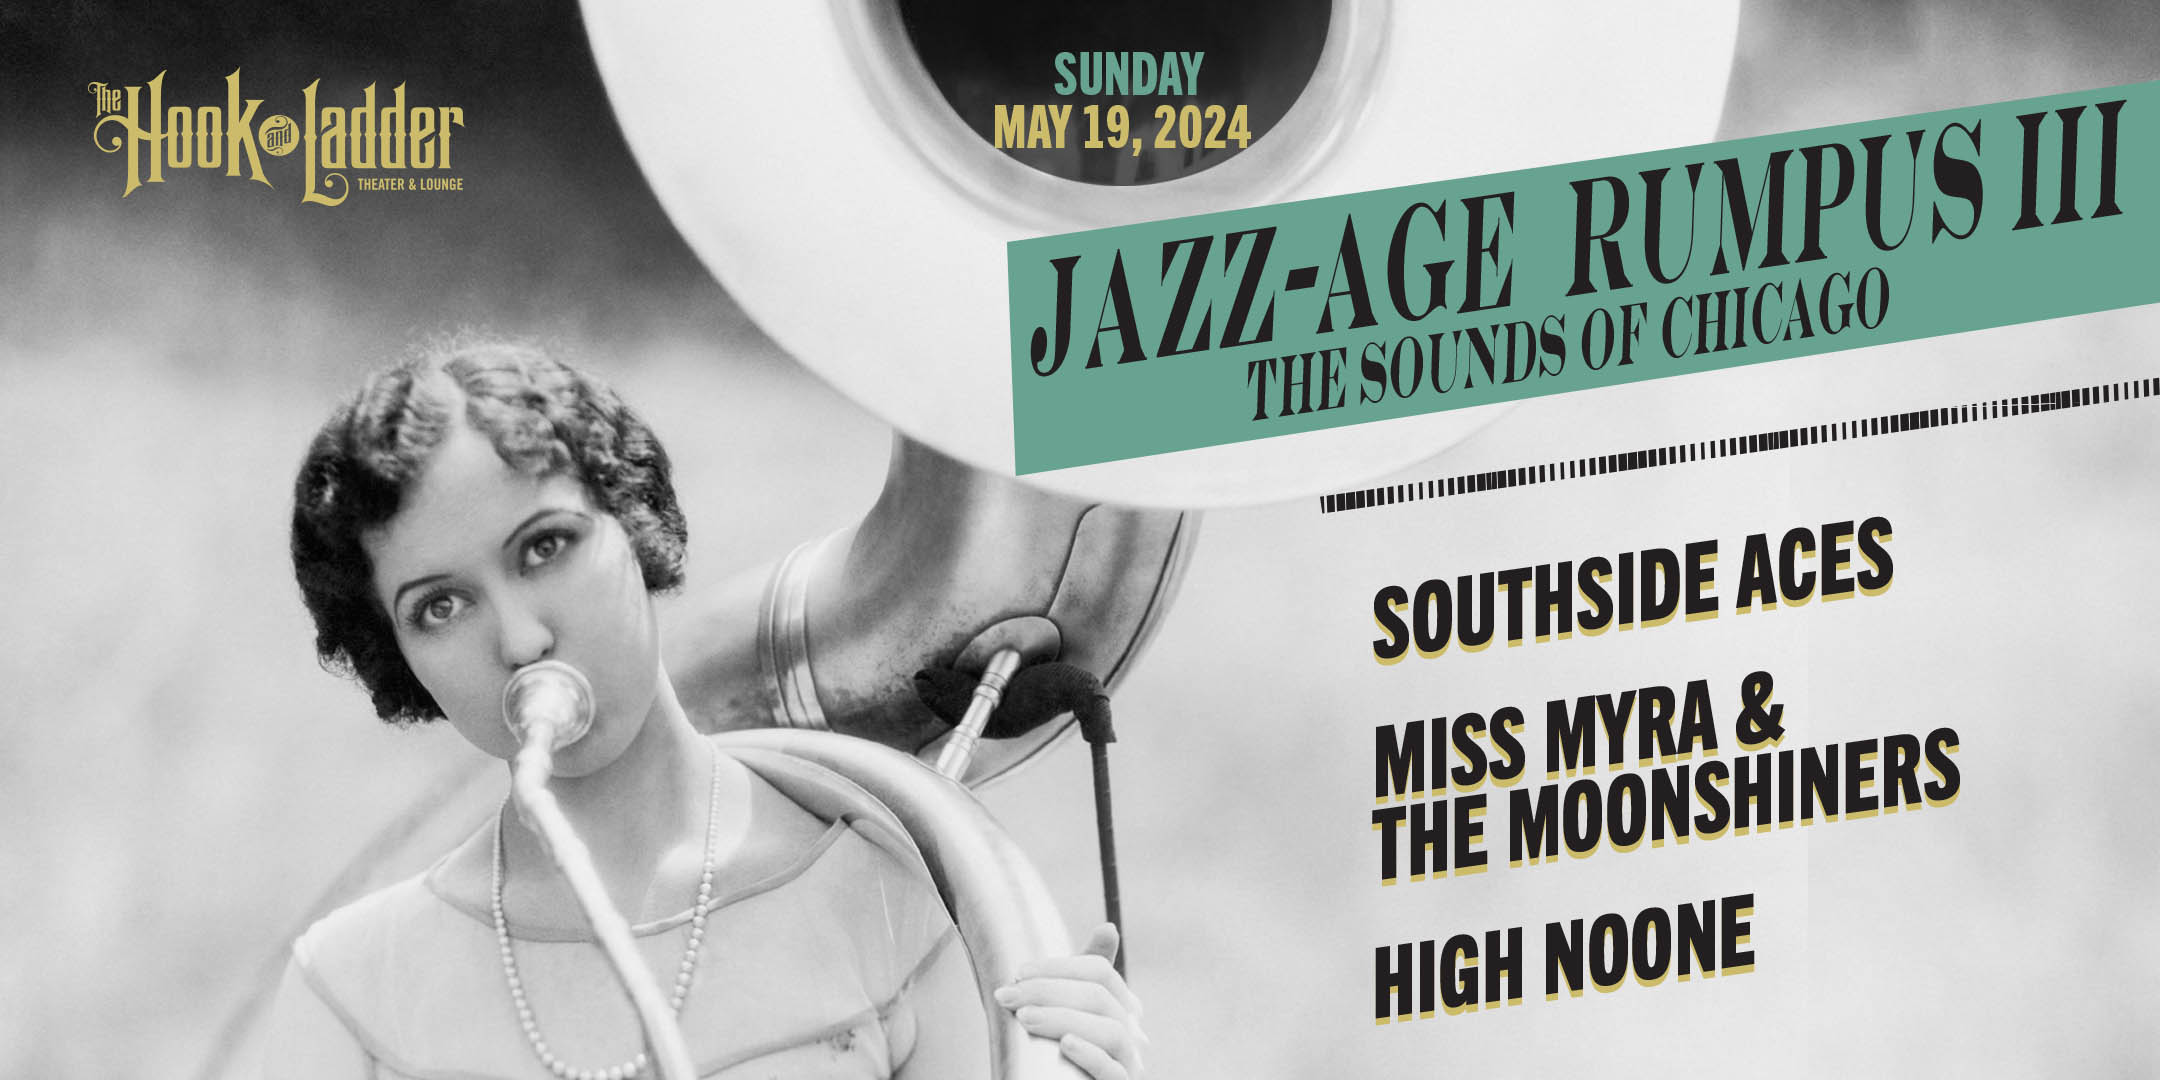 Jazz Age Rumpus III: The Sounds of Chicago Featuring Southside Aces, Miss Myra & The Moonshiners, & High Noon The Hook and Ladder Theater Doors 2:30pm : Music 3:00pm General Admission: $15 EARLY/$20 ADV/$25 DOS 21+